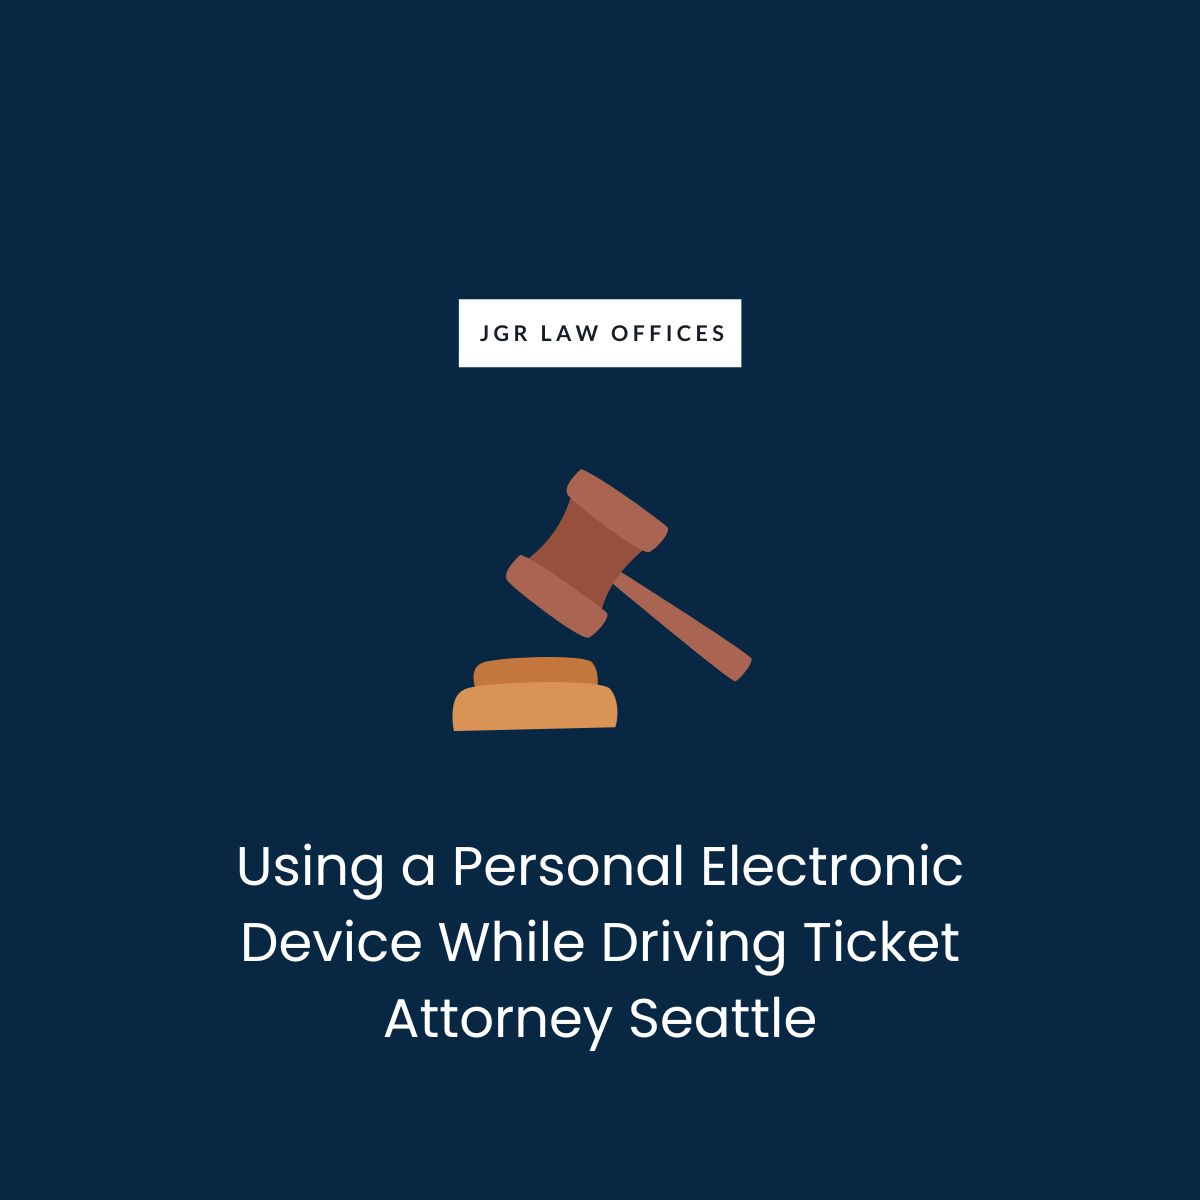 Using a Personal Electronic Device While Driving Ticket Attorney Seattle